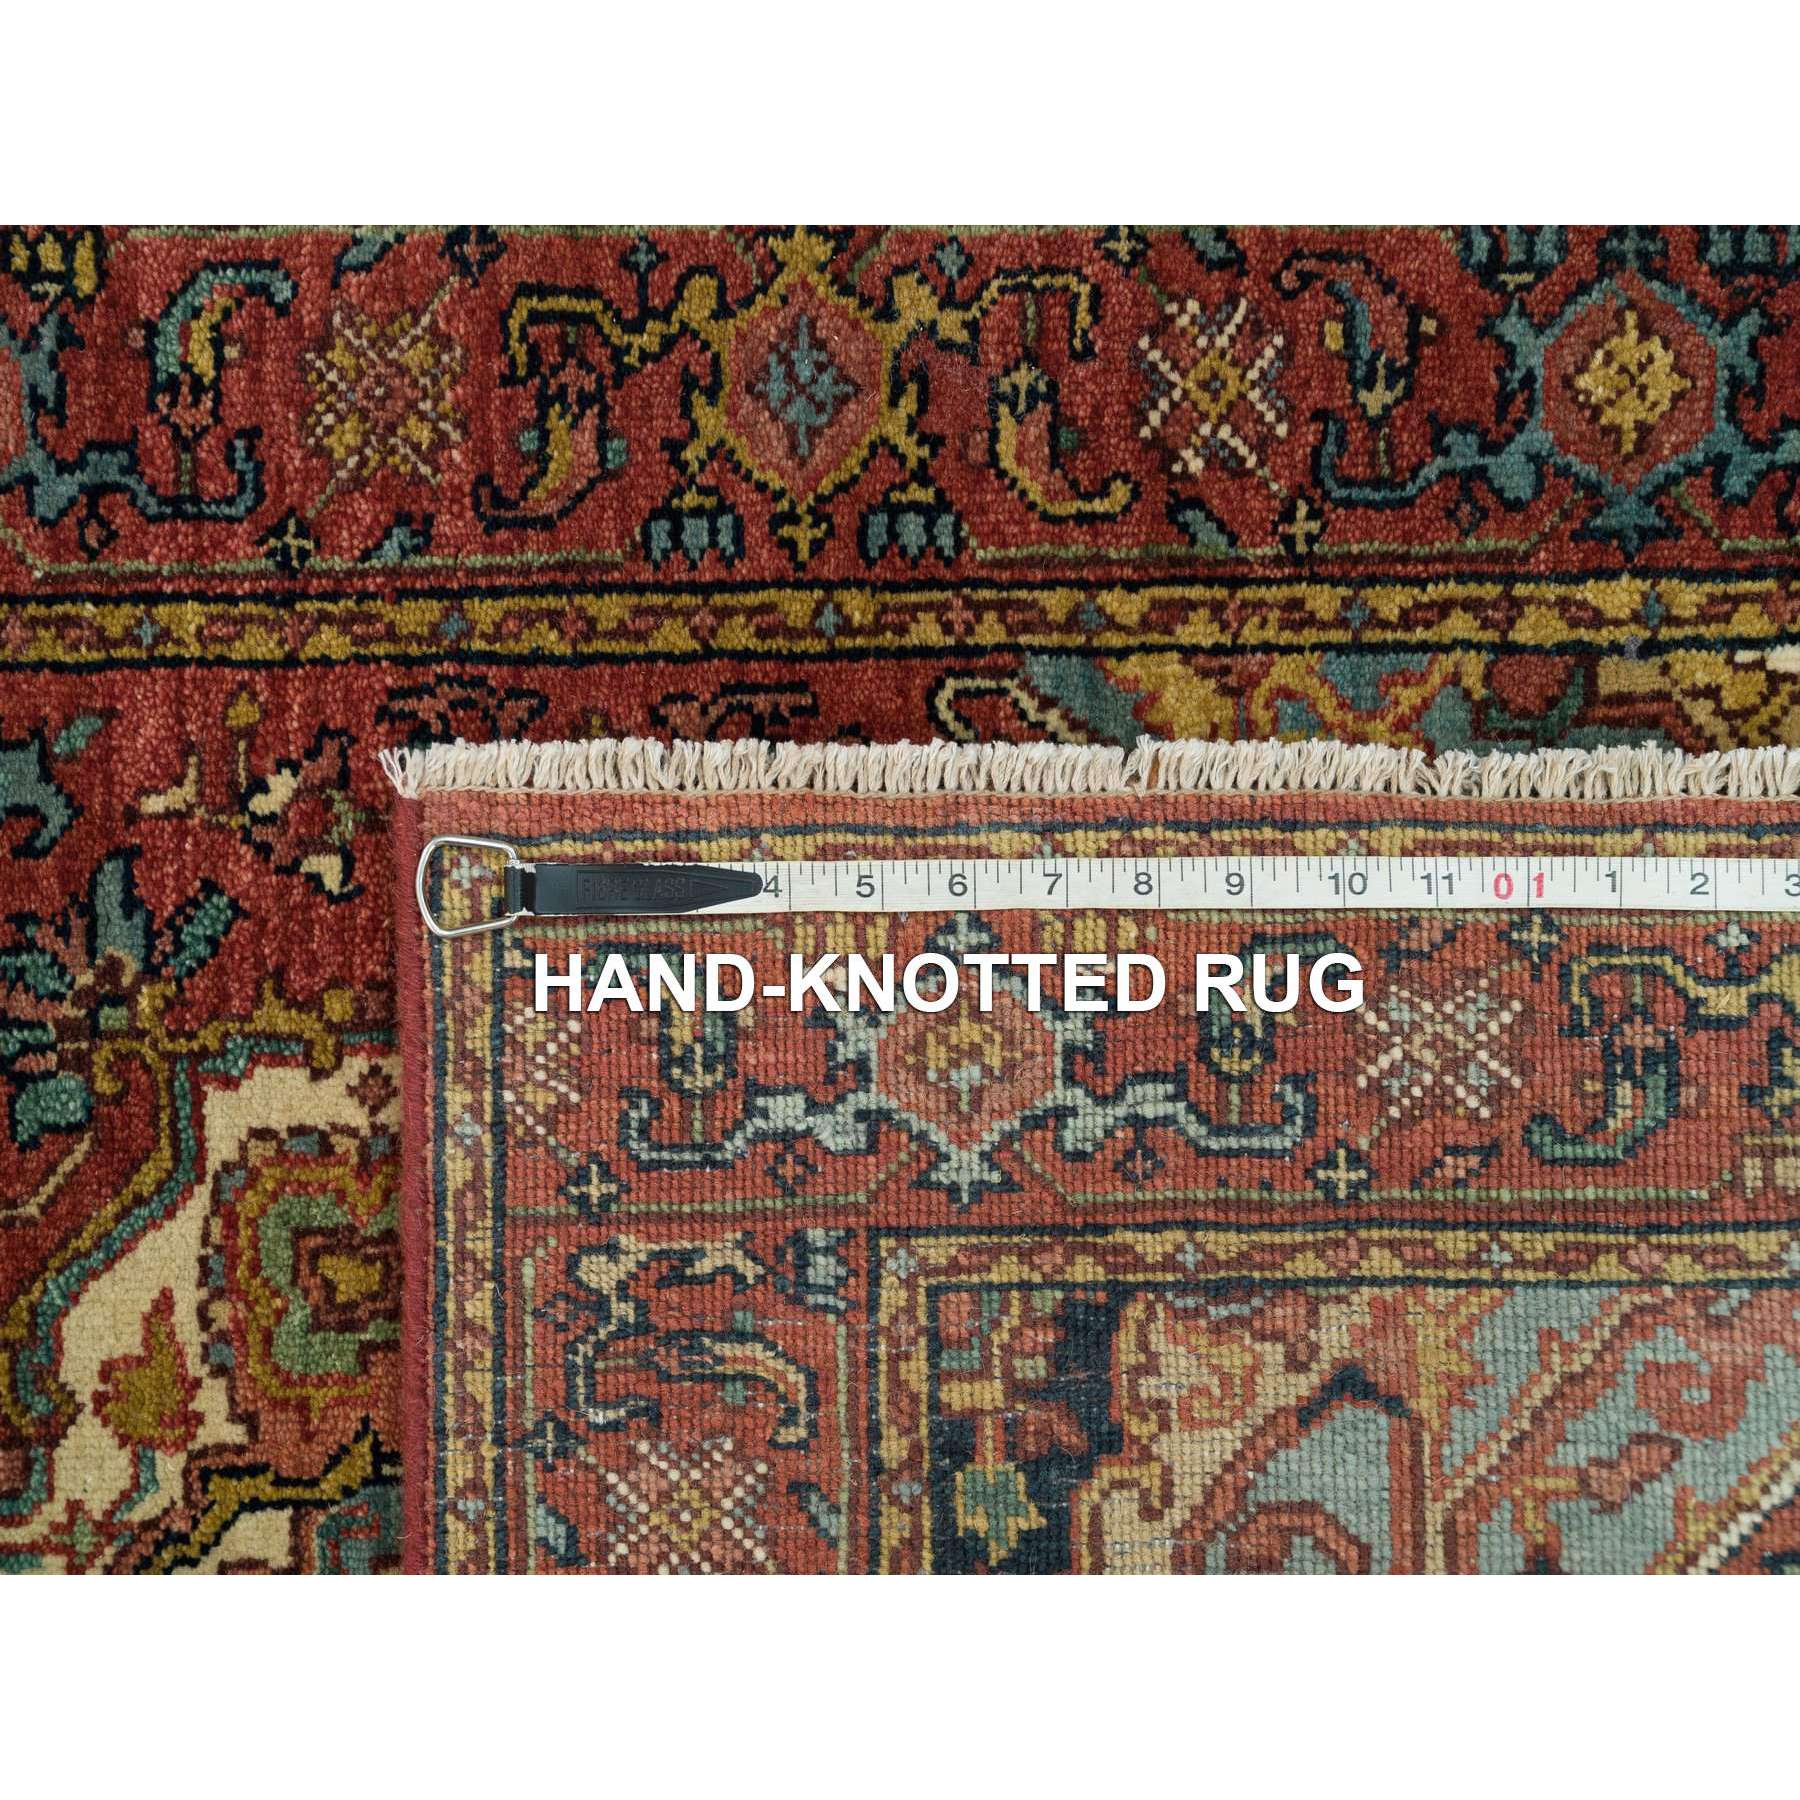 2'8"x8' Burgundy Red, Hand Woven Extra Soft Wool, Vegetable Dyes, Densely Woven, Antiqued Fine Heriz Re-Creation, Runner Oriental Rug 